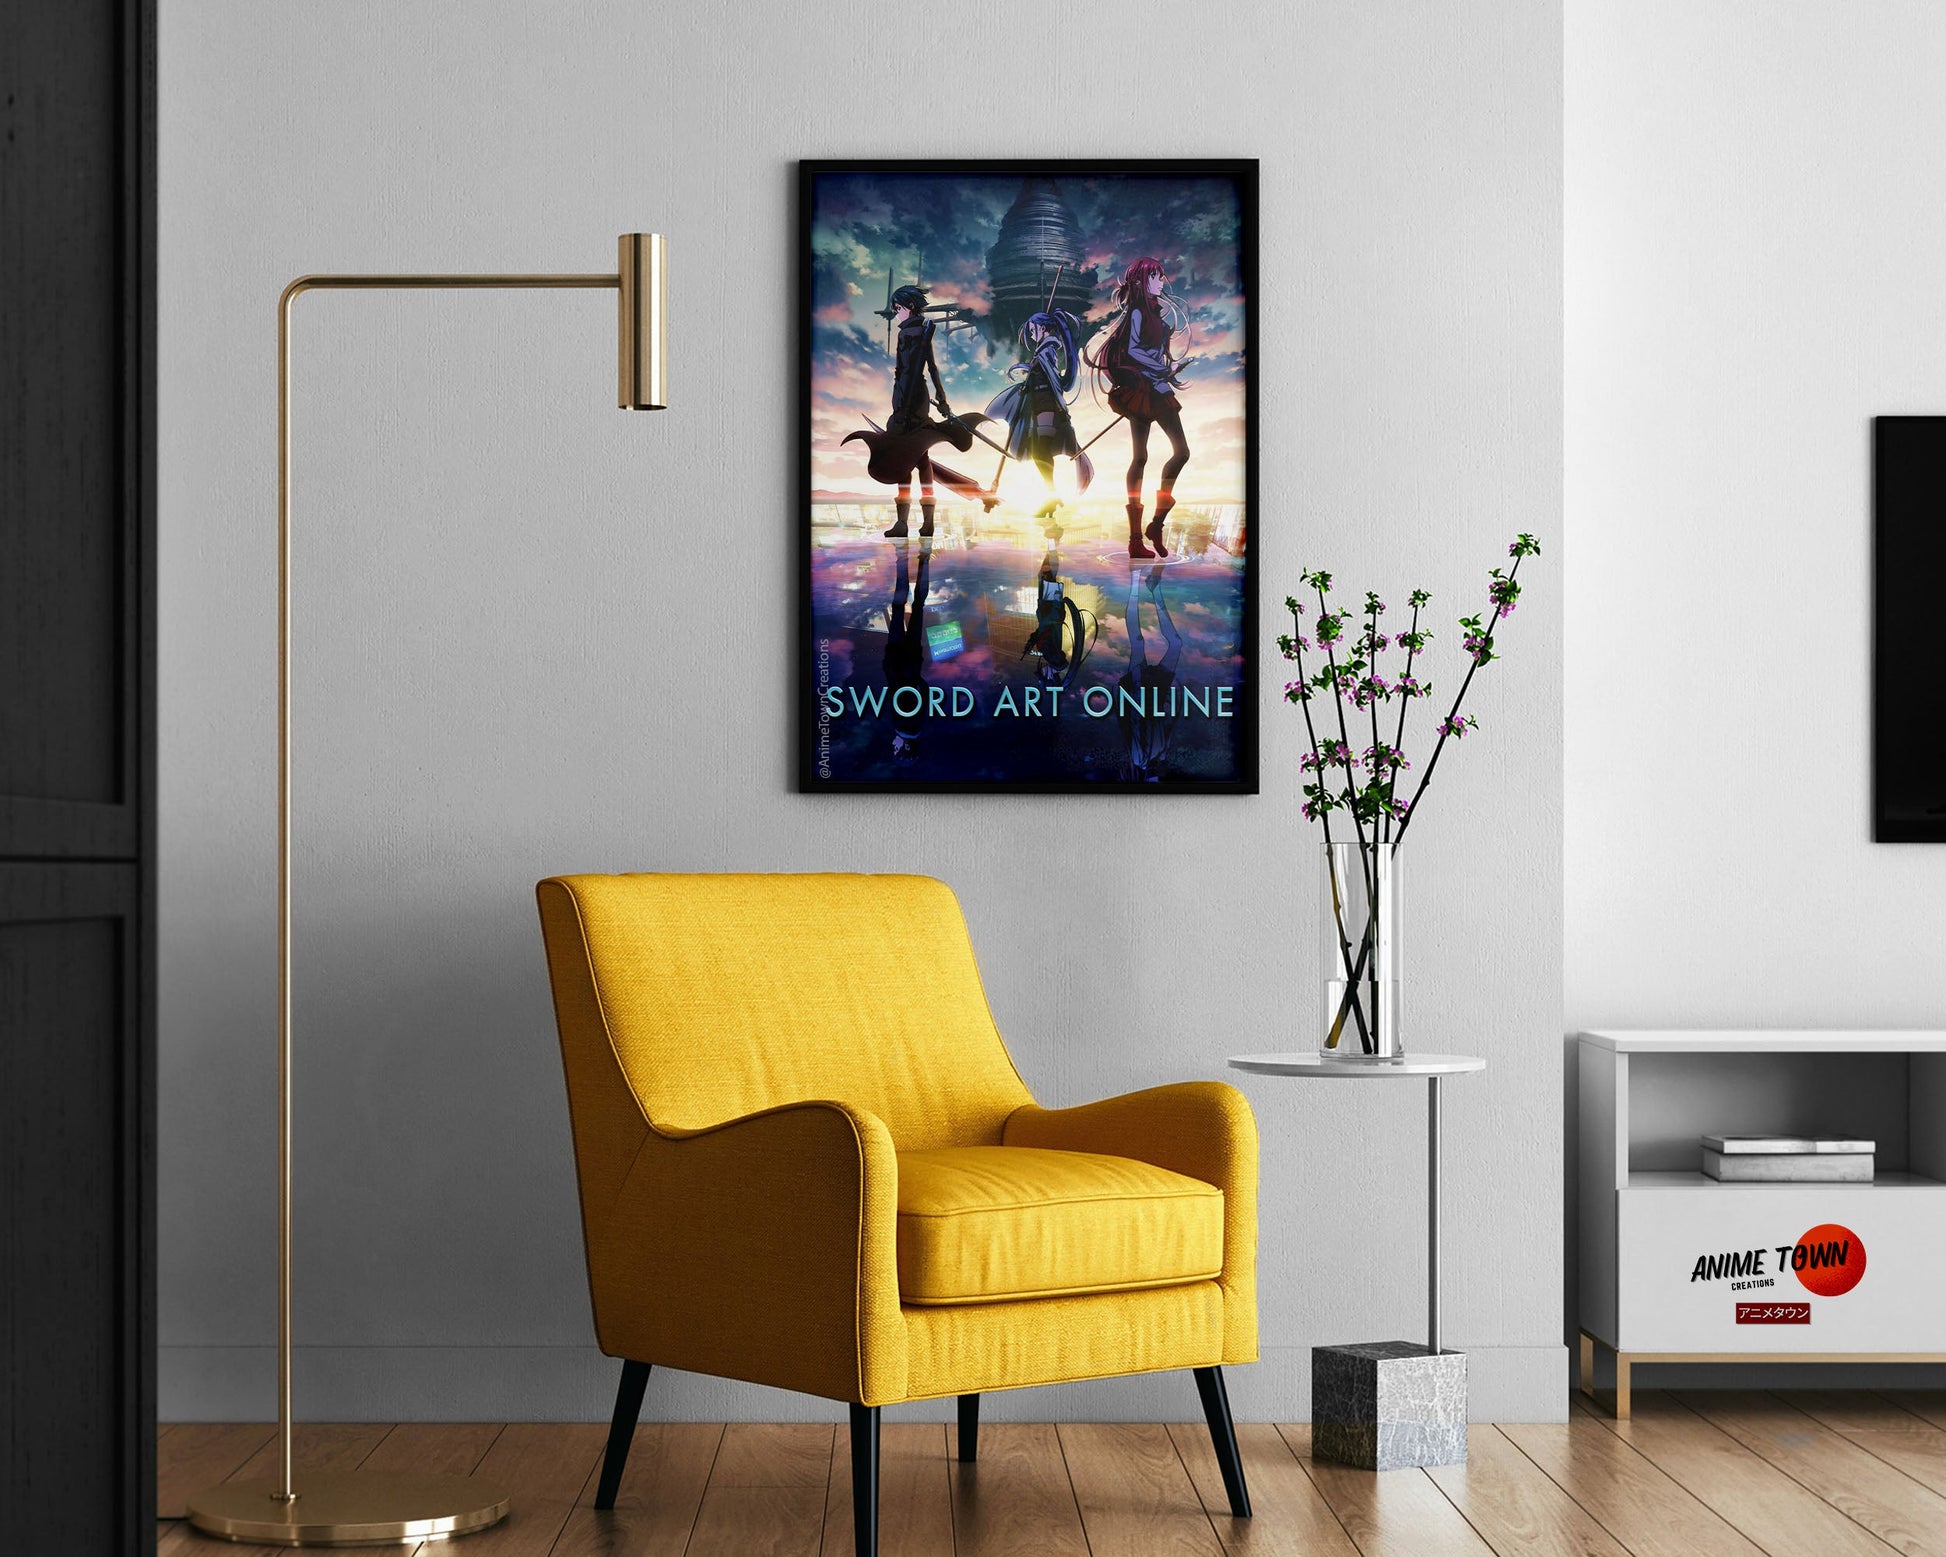 Anime Town Creations Poster Sword Art Online Skyscape 11" x 17" Home Goods - Anime Sword Art Online Poster